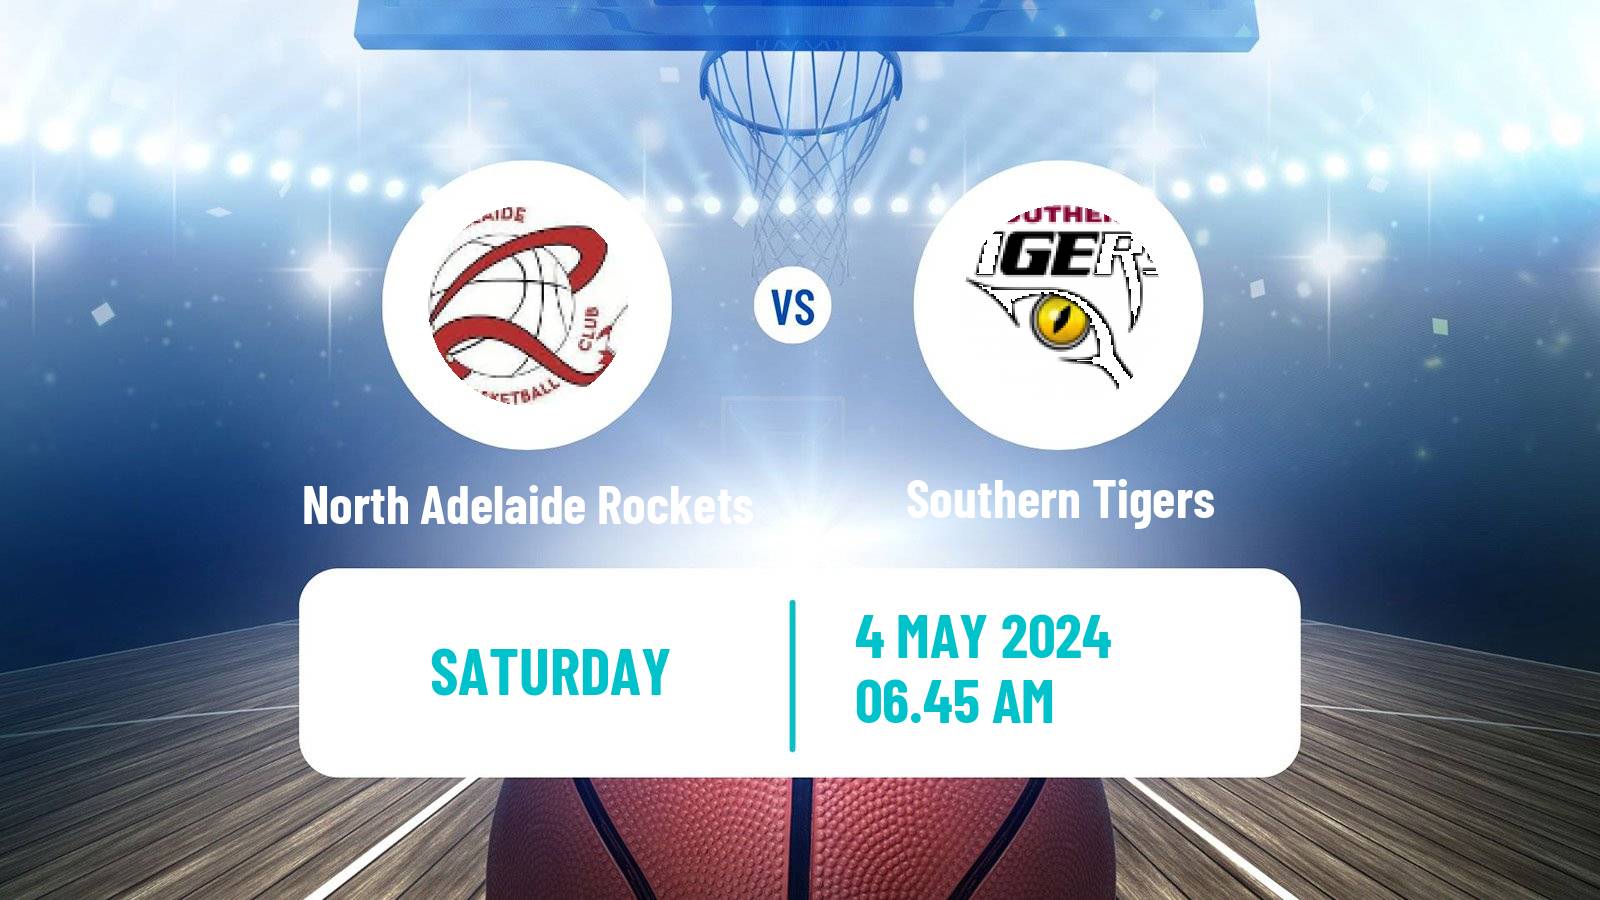 Basketball Australian NBL1 Central North Adelaide Rockets - Southern Tigers